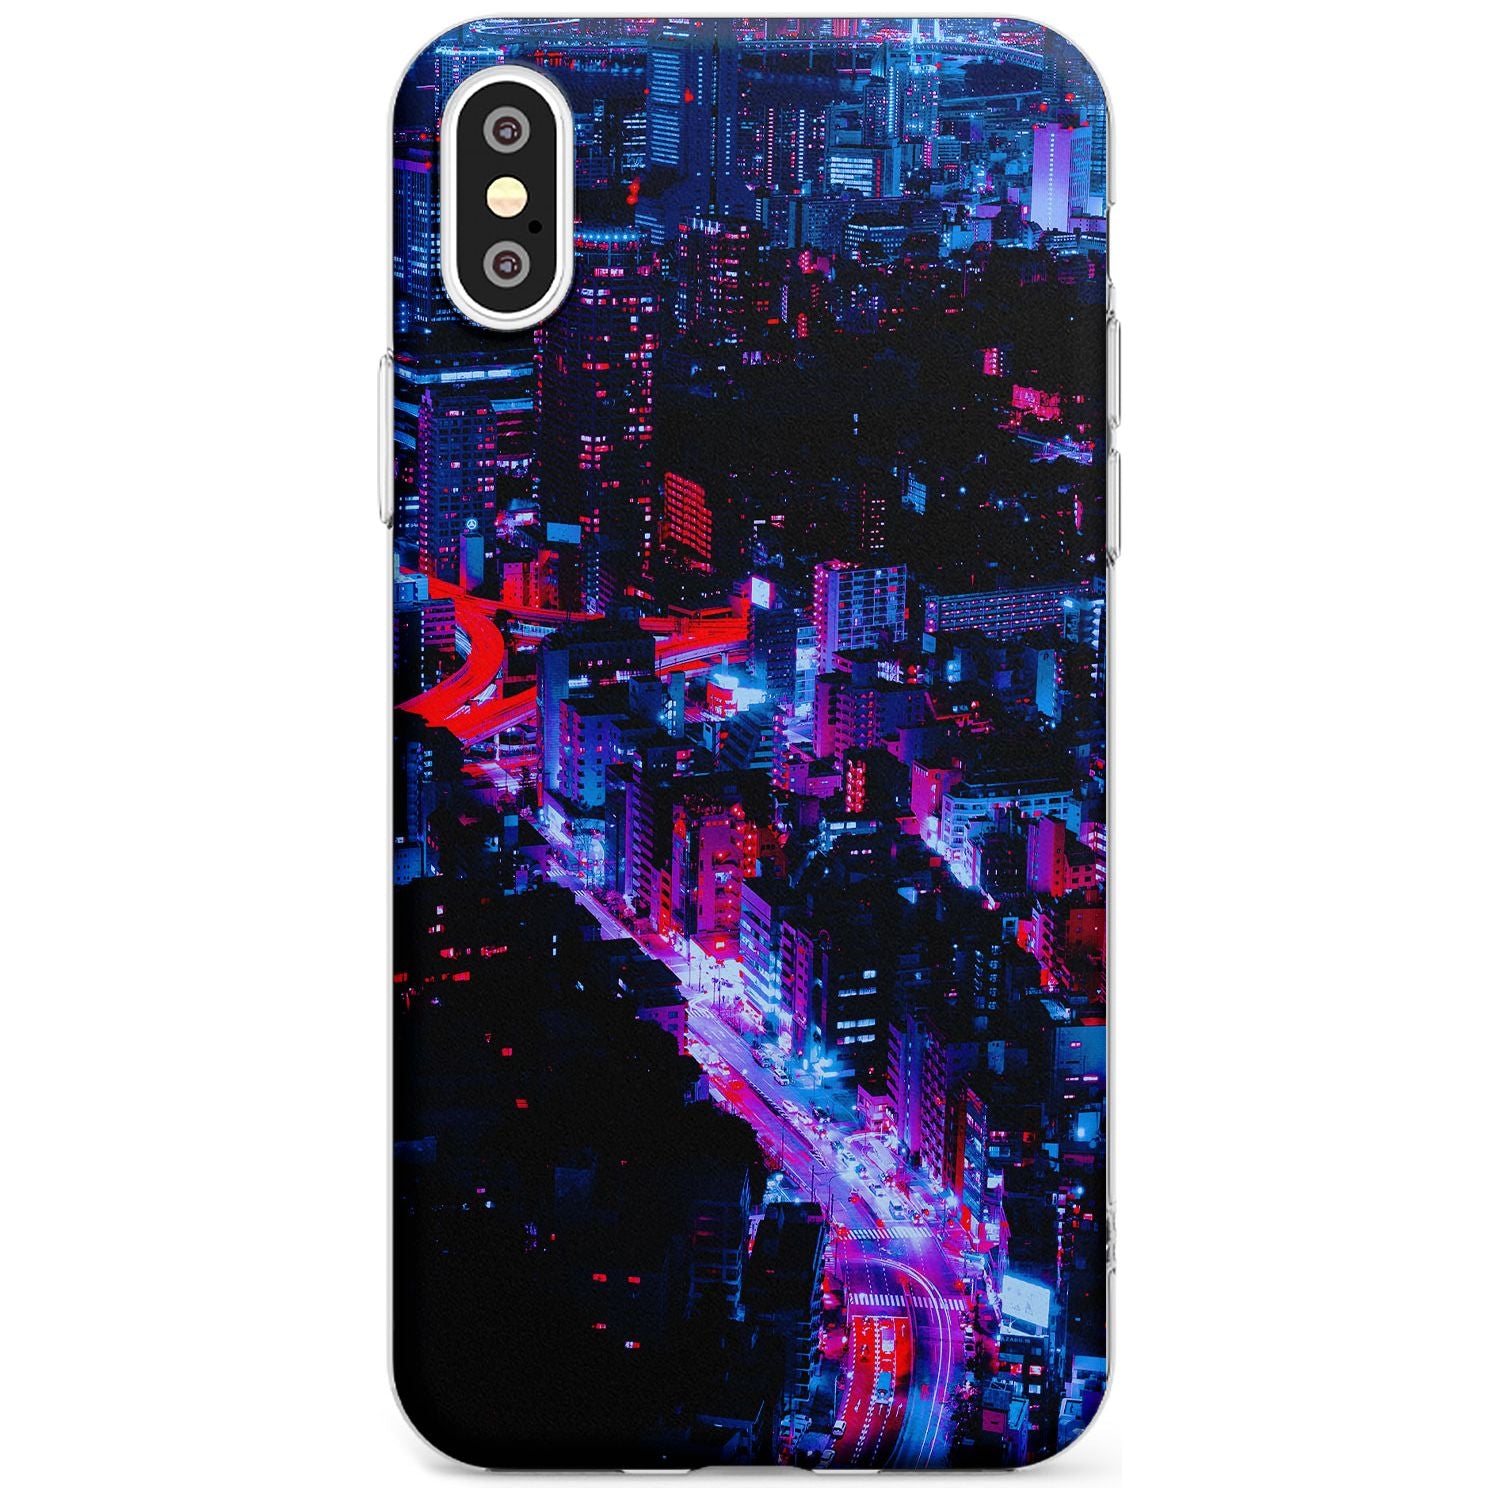 Arial City View - Neon Cities Photographs Slim TPU Phone Case Warehouse X XS Max XR